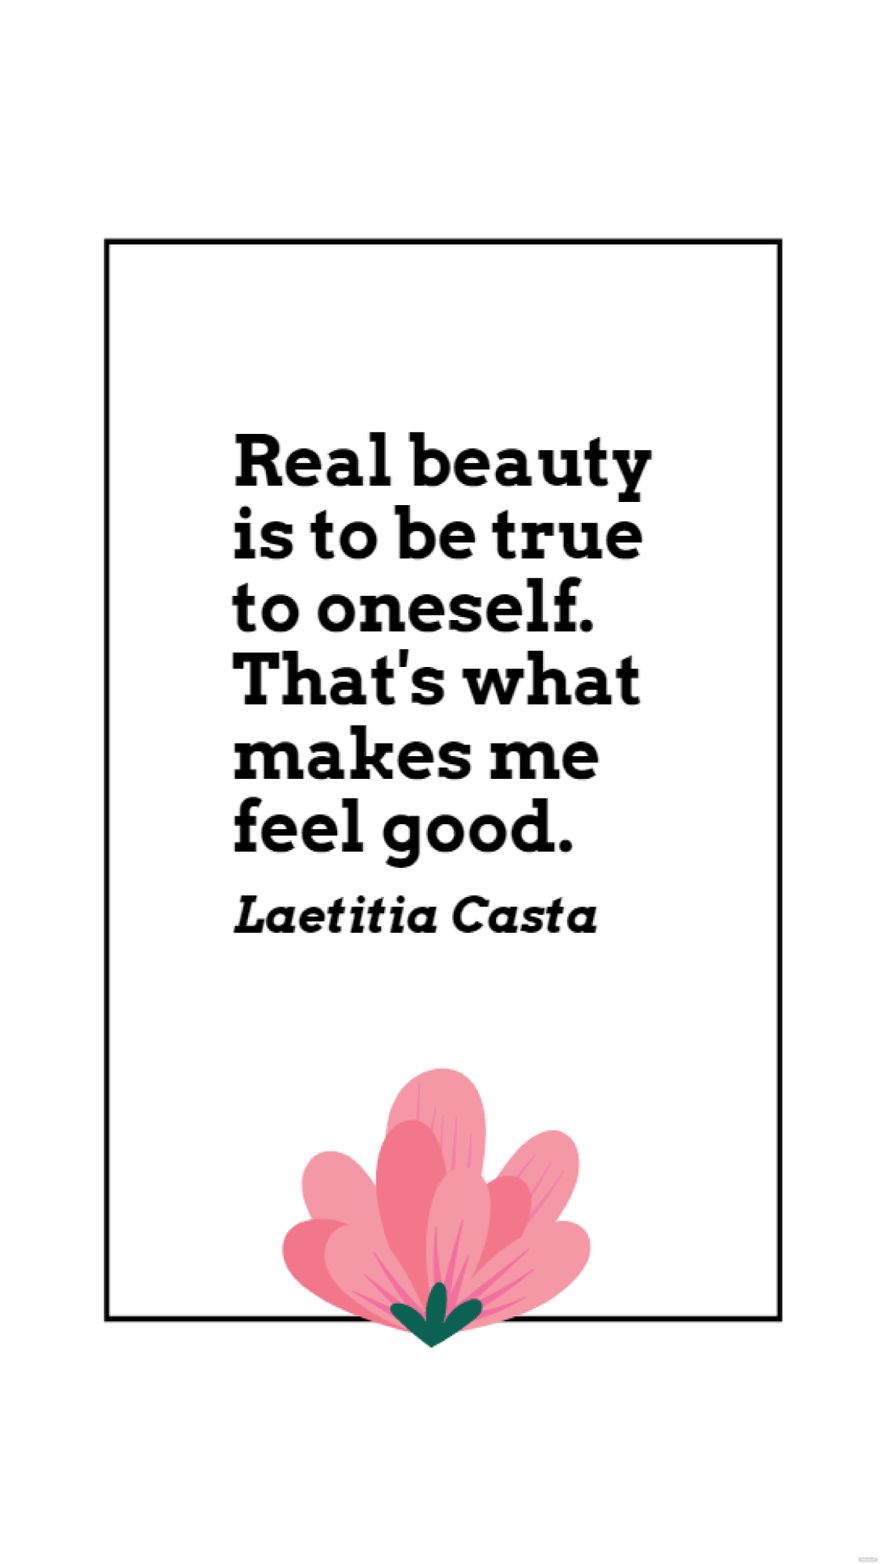 Free Laetitia Casta - Real beauty is to be true to oneself. That's what makes me feel good. in JPG